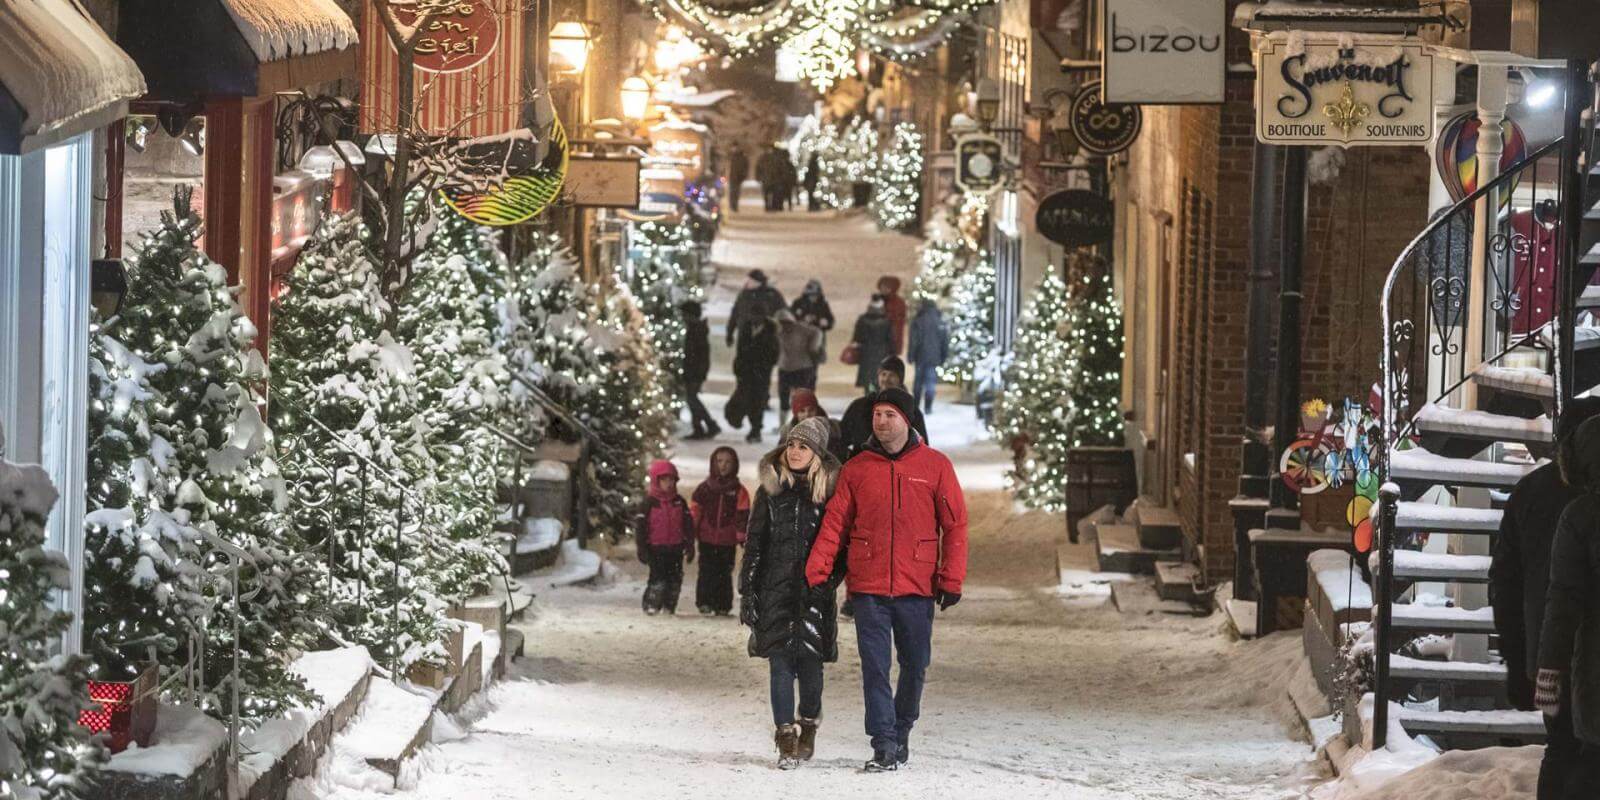  Several people walk in the evening on rue du Petit-Champlain, covered with snow and decorated with many illuminated trees.